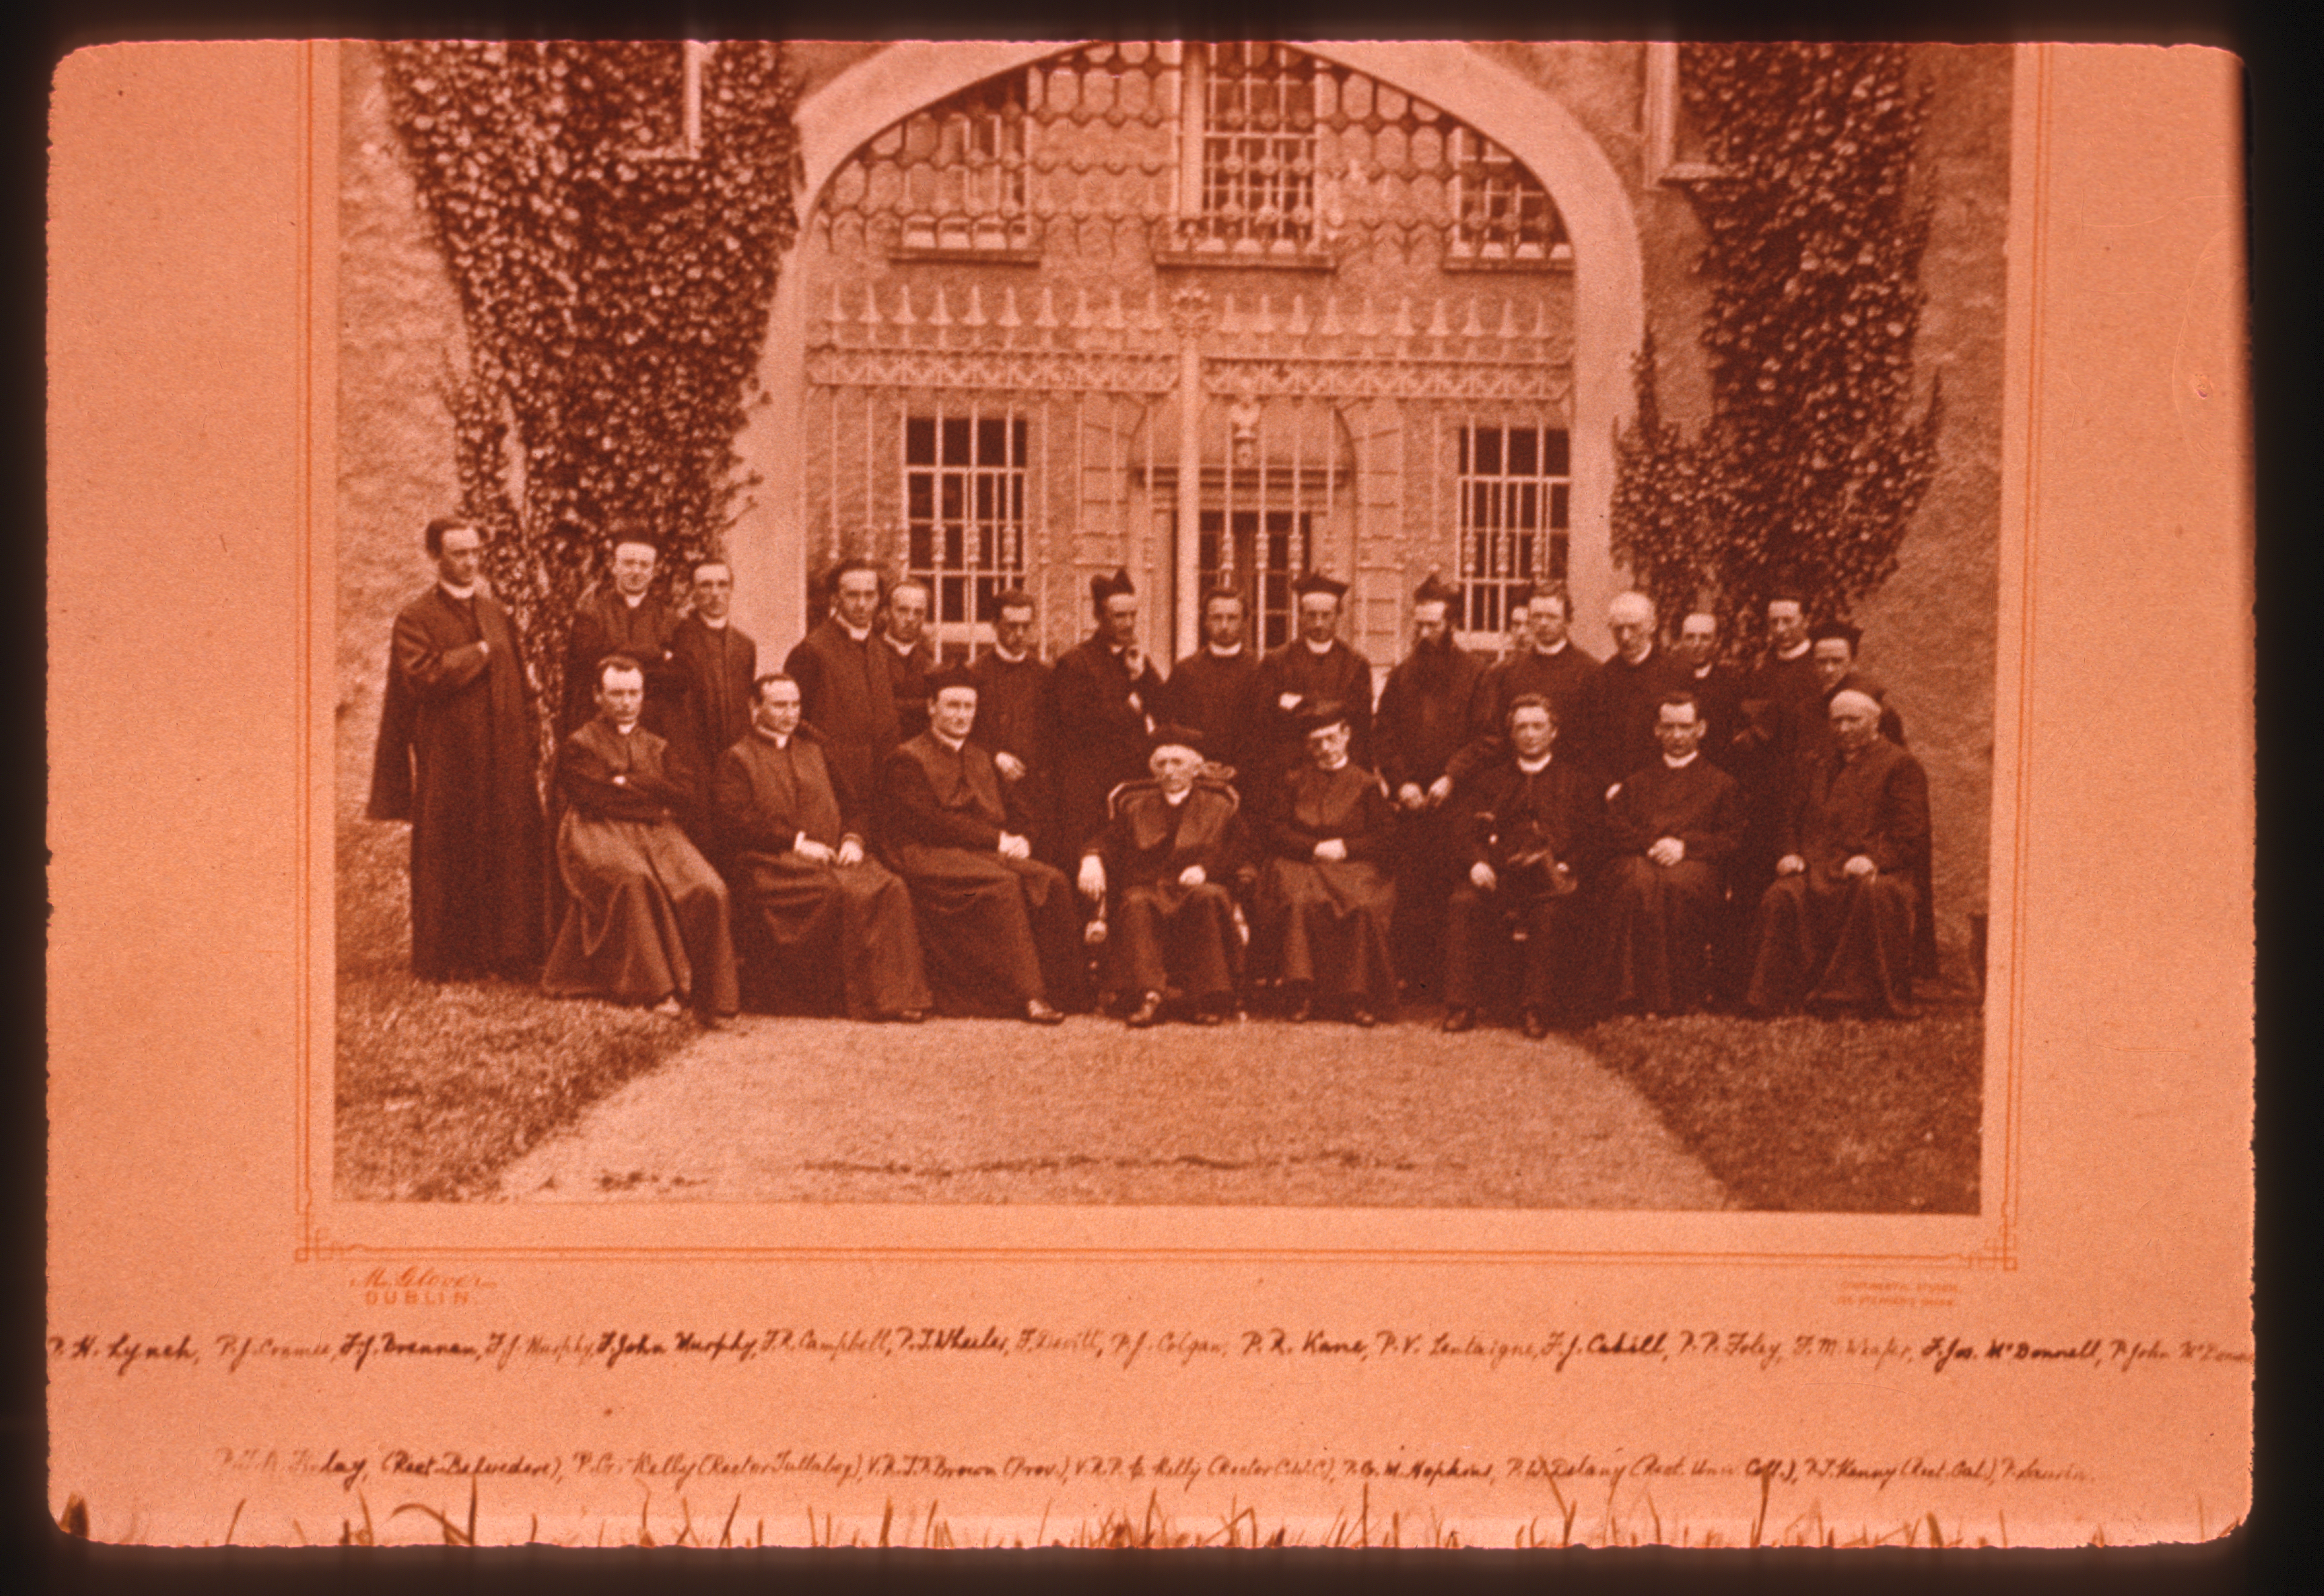 a photograph of Hopkins and twenty two other Jesuits formally posing